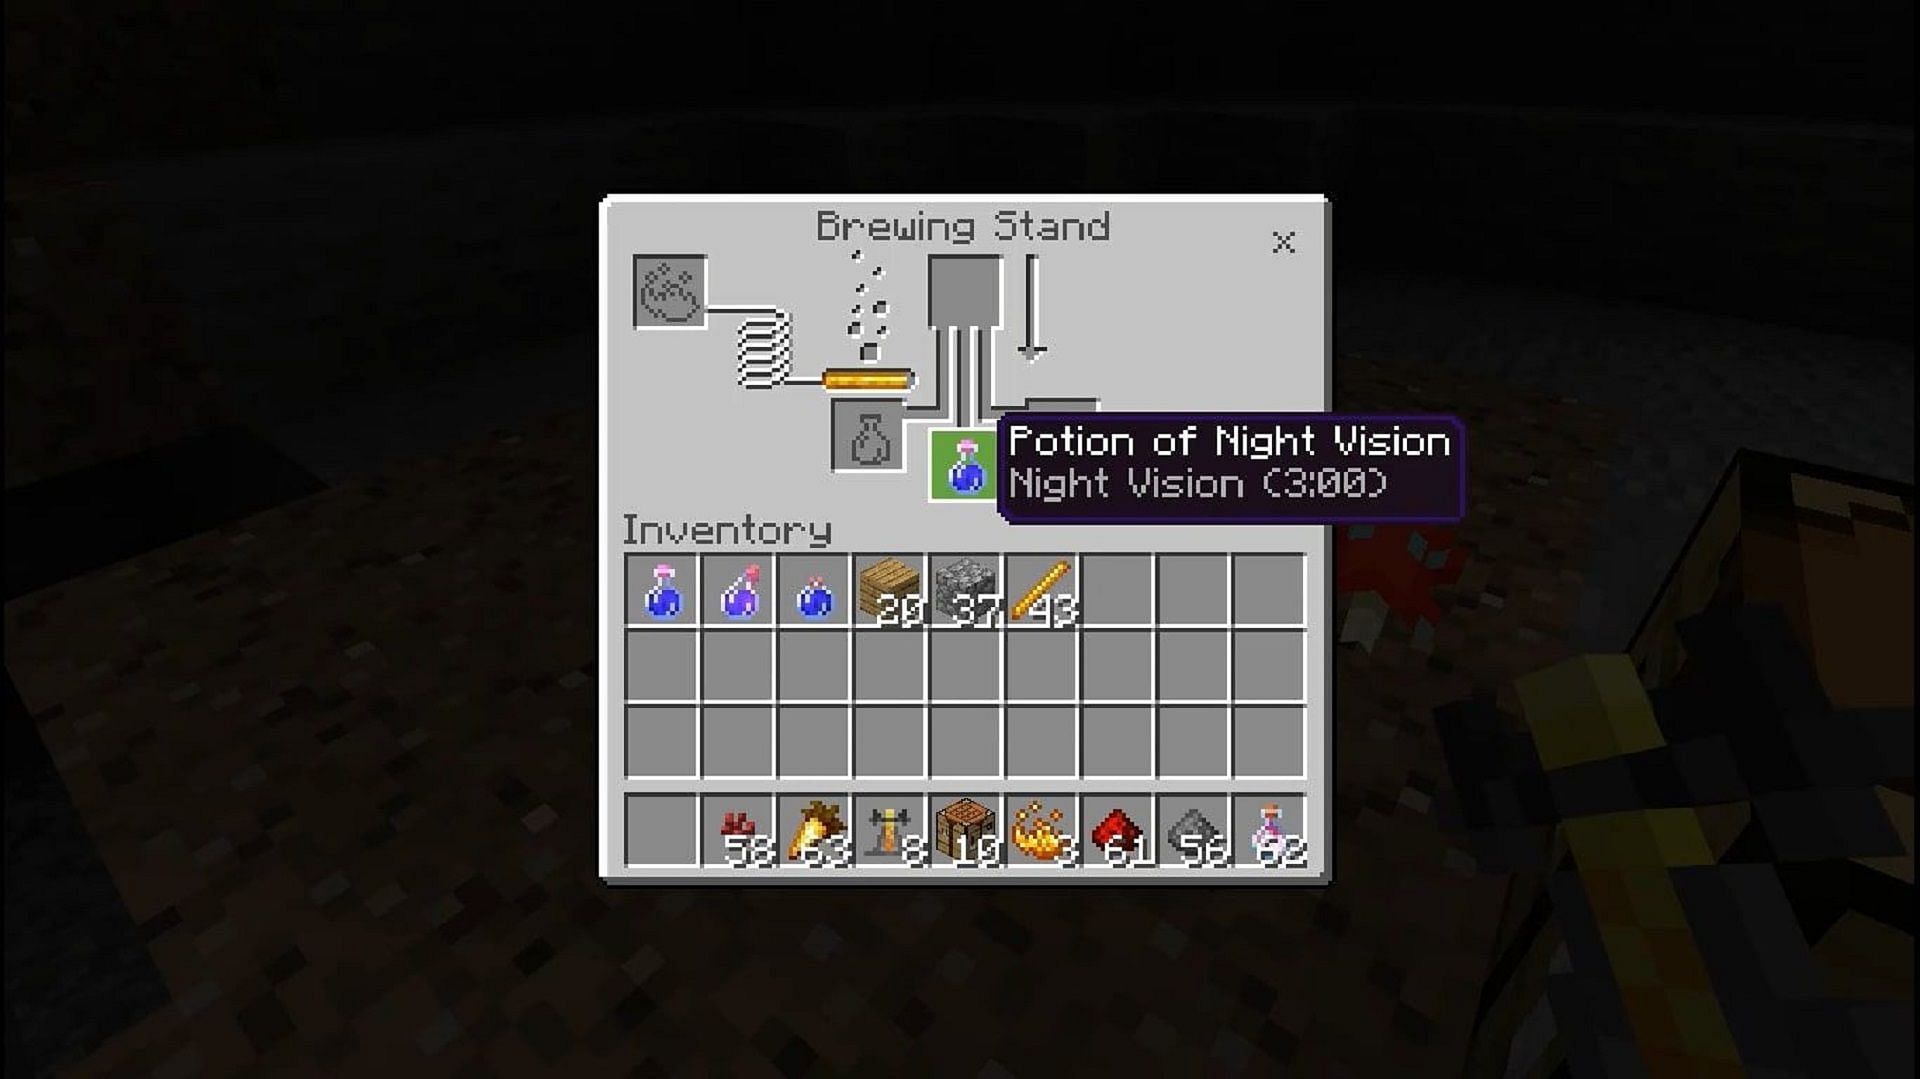 Potions of Night Vision allow players to see in the dark for a set amount of time (Image via Mojang)